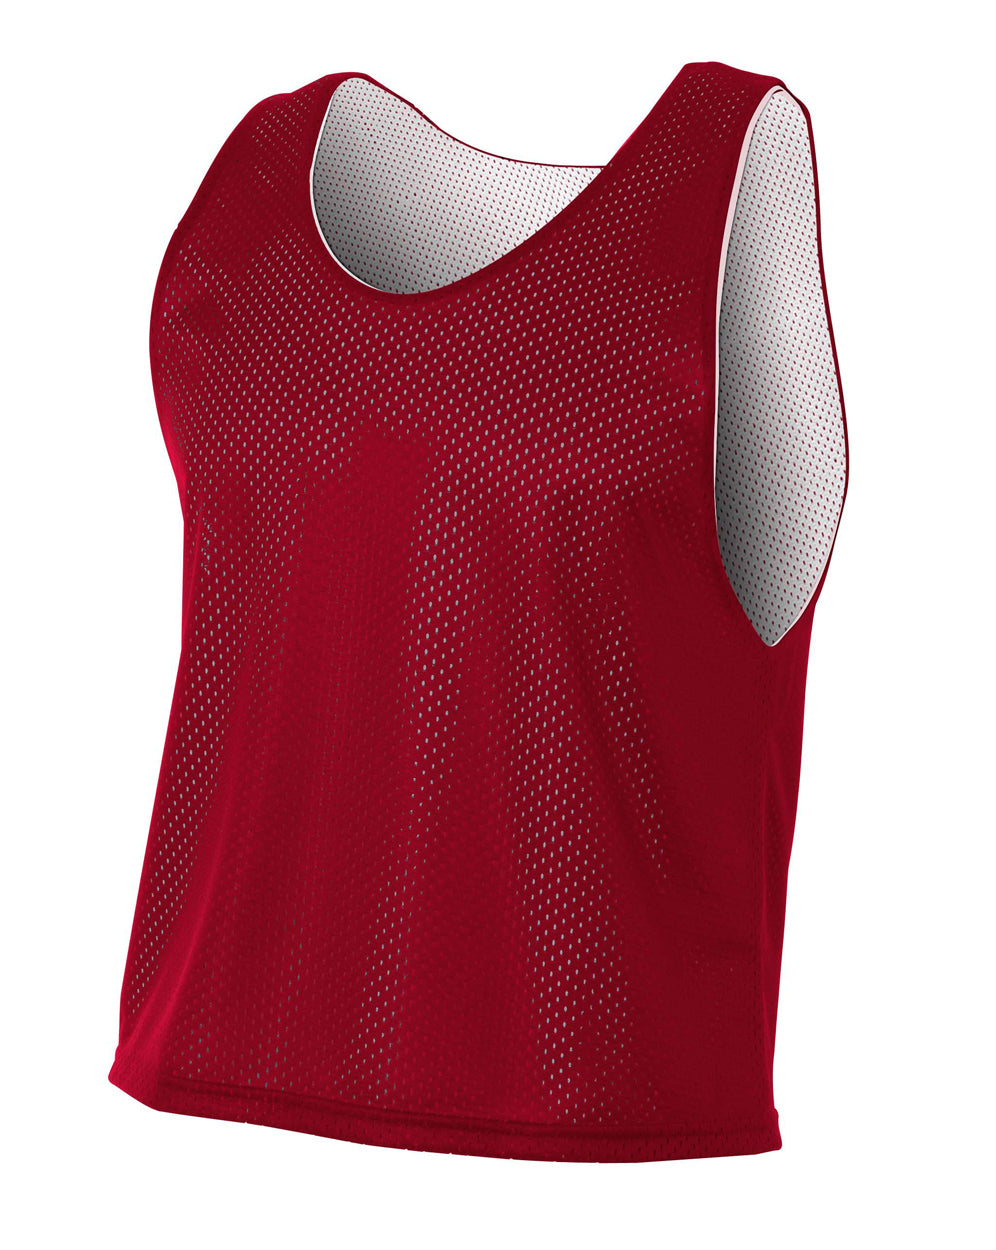 Cardinal/white A4 Lacrosse Reversible Practice Jersey